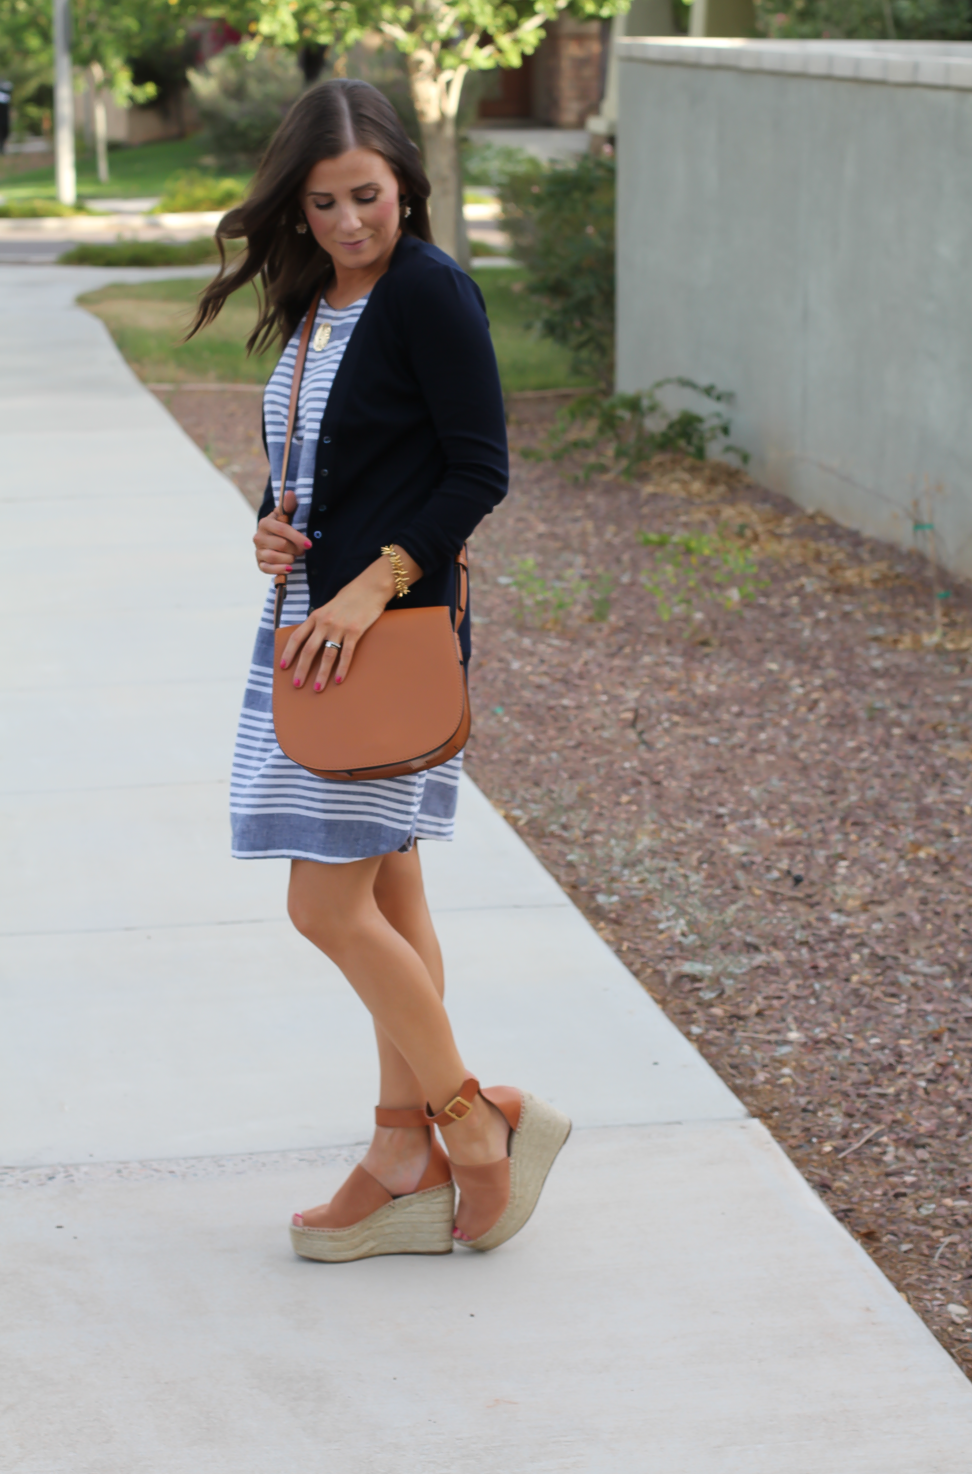 Blue Chambray White Striped Dress, Navy Cotton Cardigan, Tan Suede Espadrilles, Tan Leather Crossbody, Old Navy, J.Crew, Chloe, Tory Burch